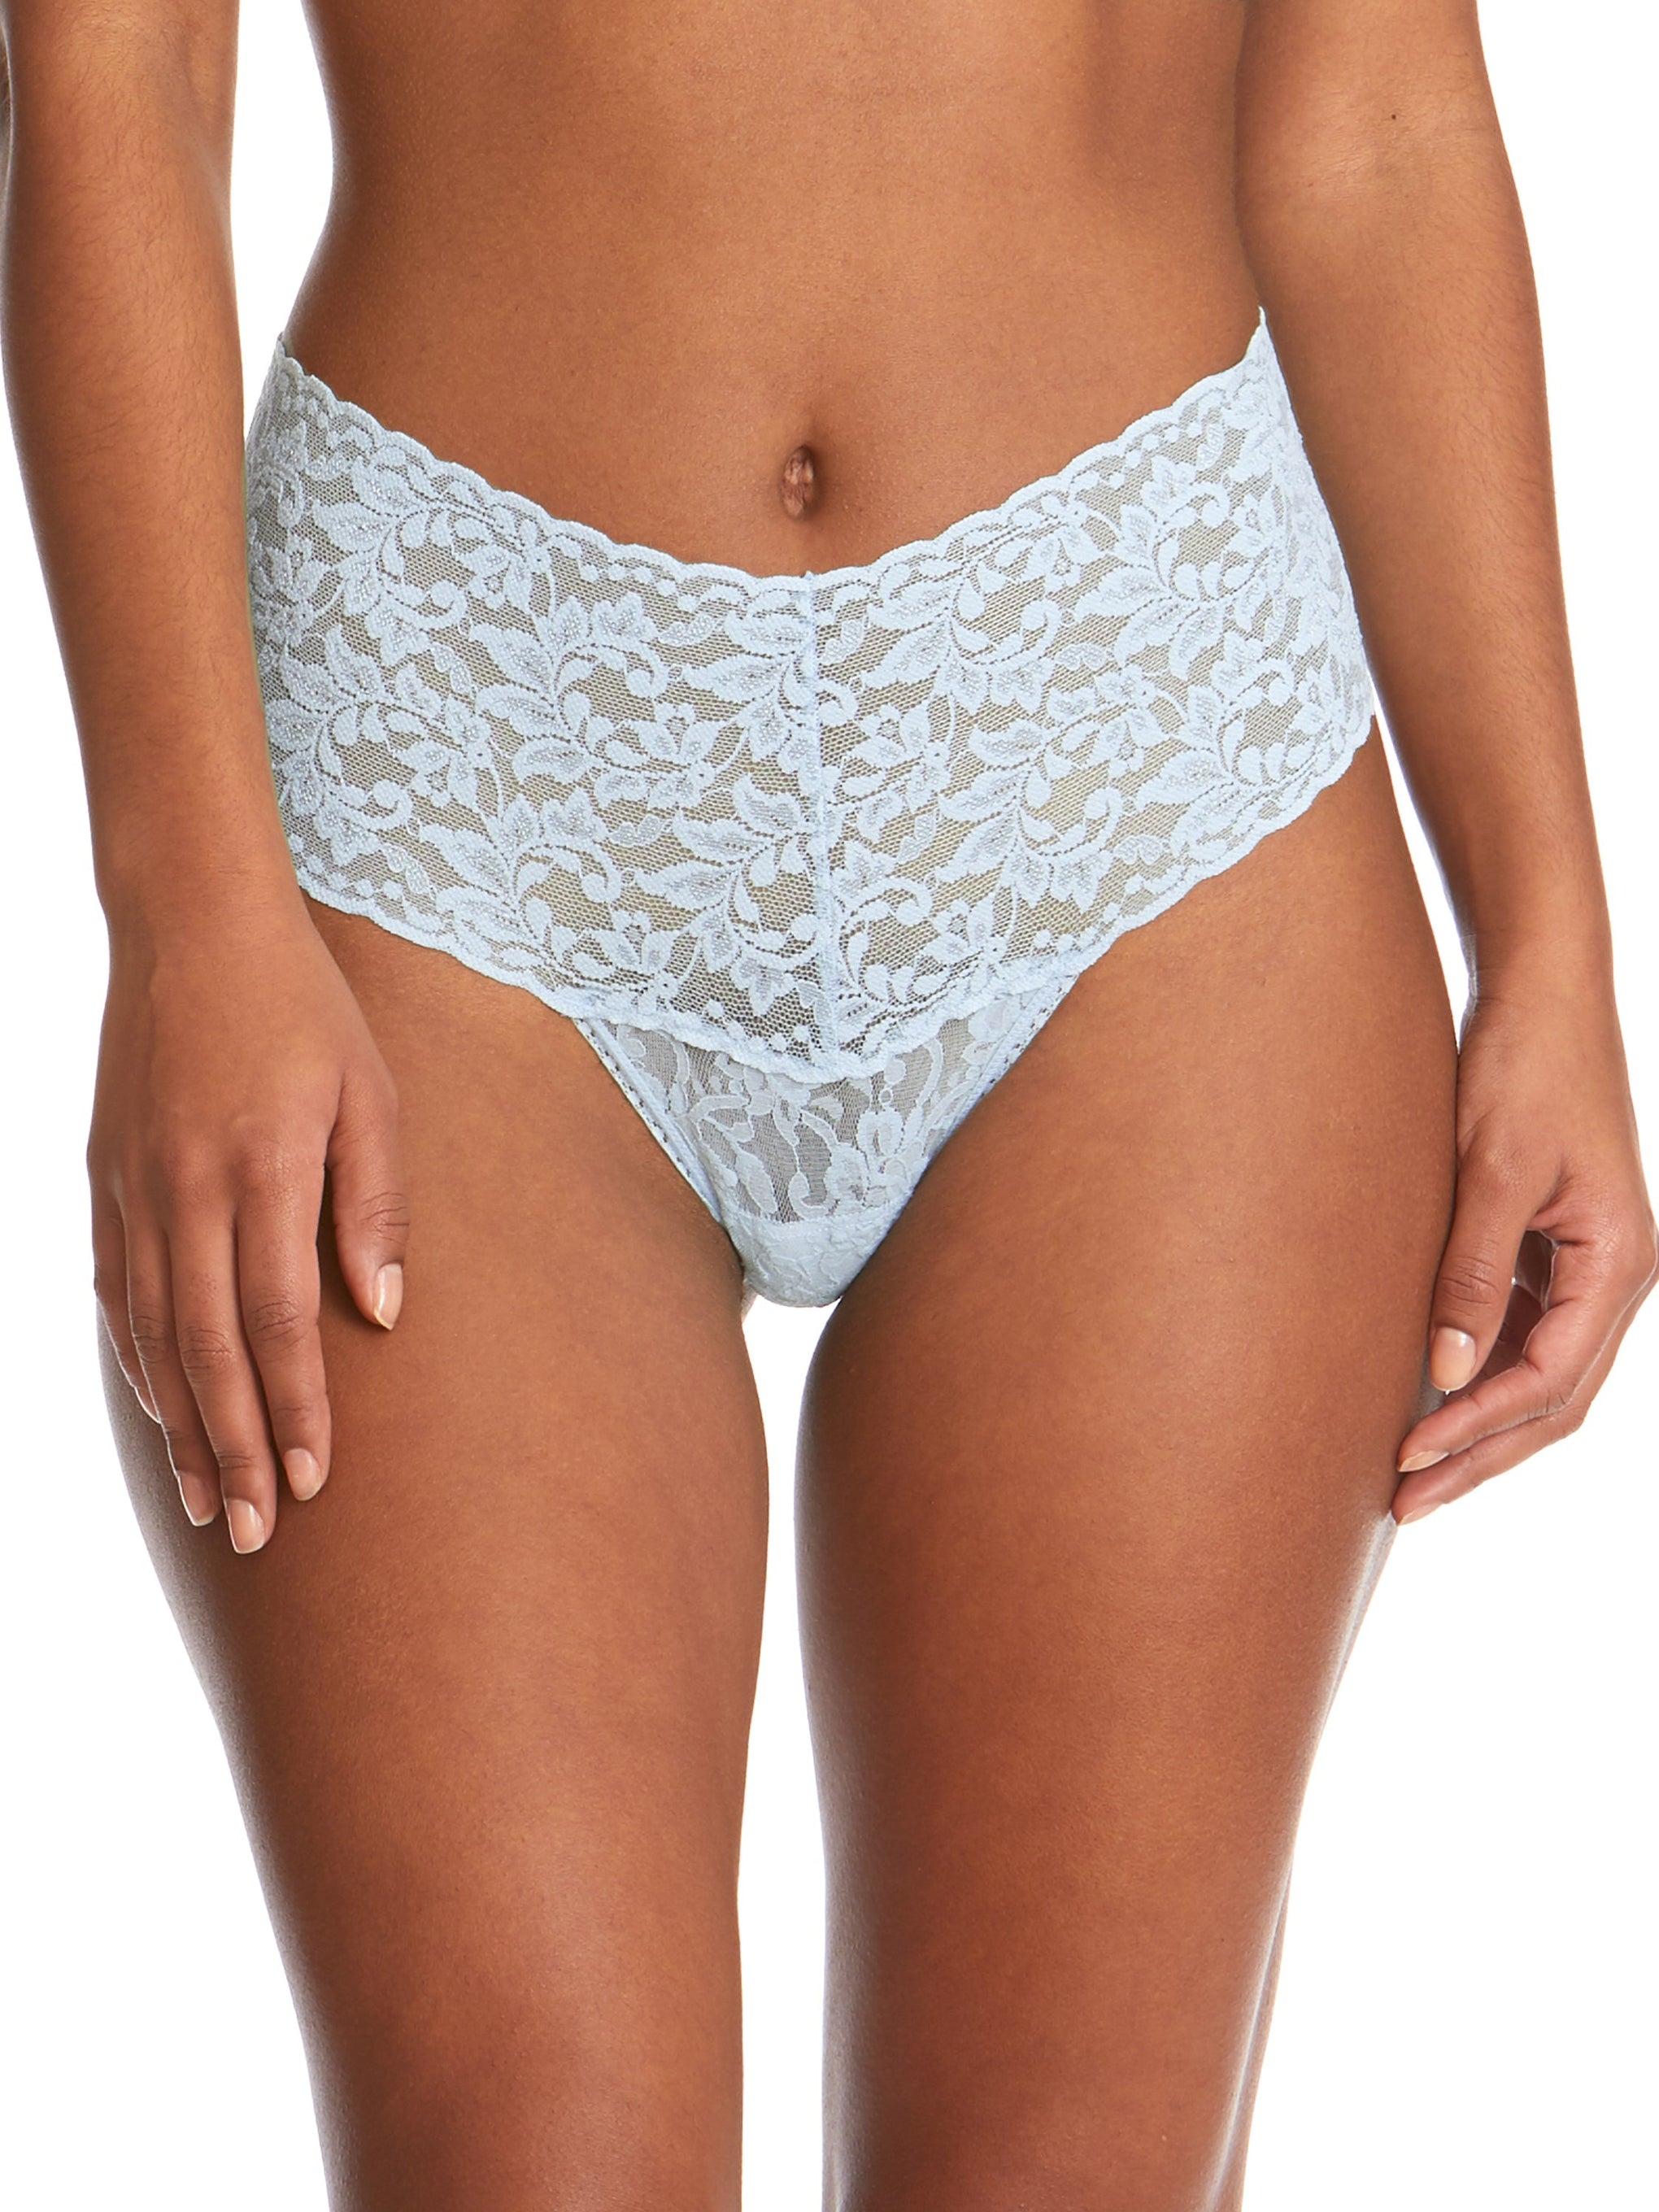 Retro Lace Thong Partly Cloudy Blue Sale